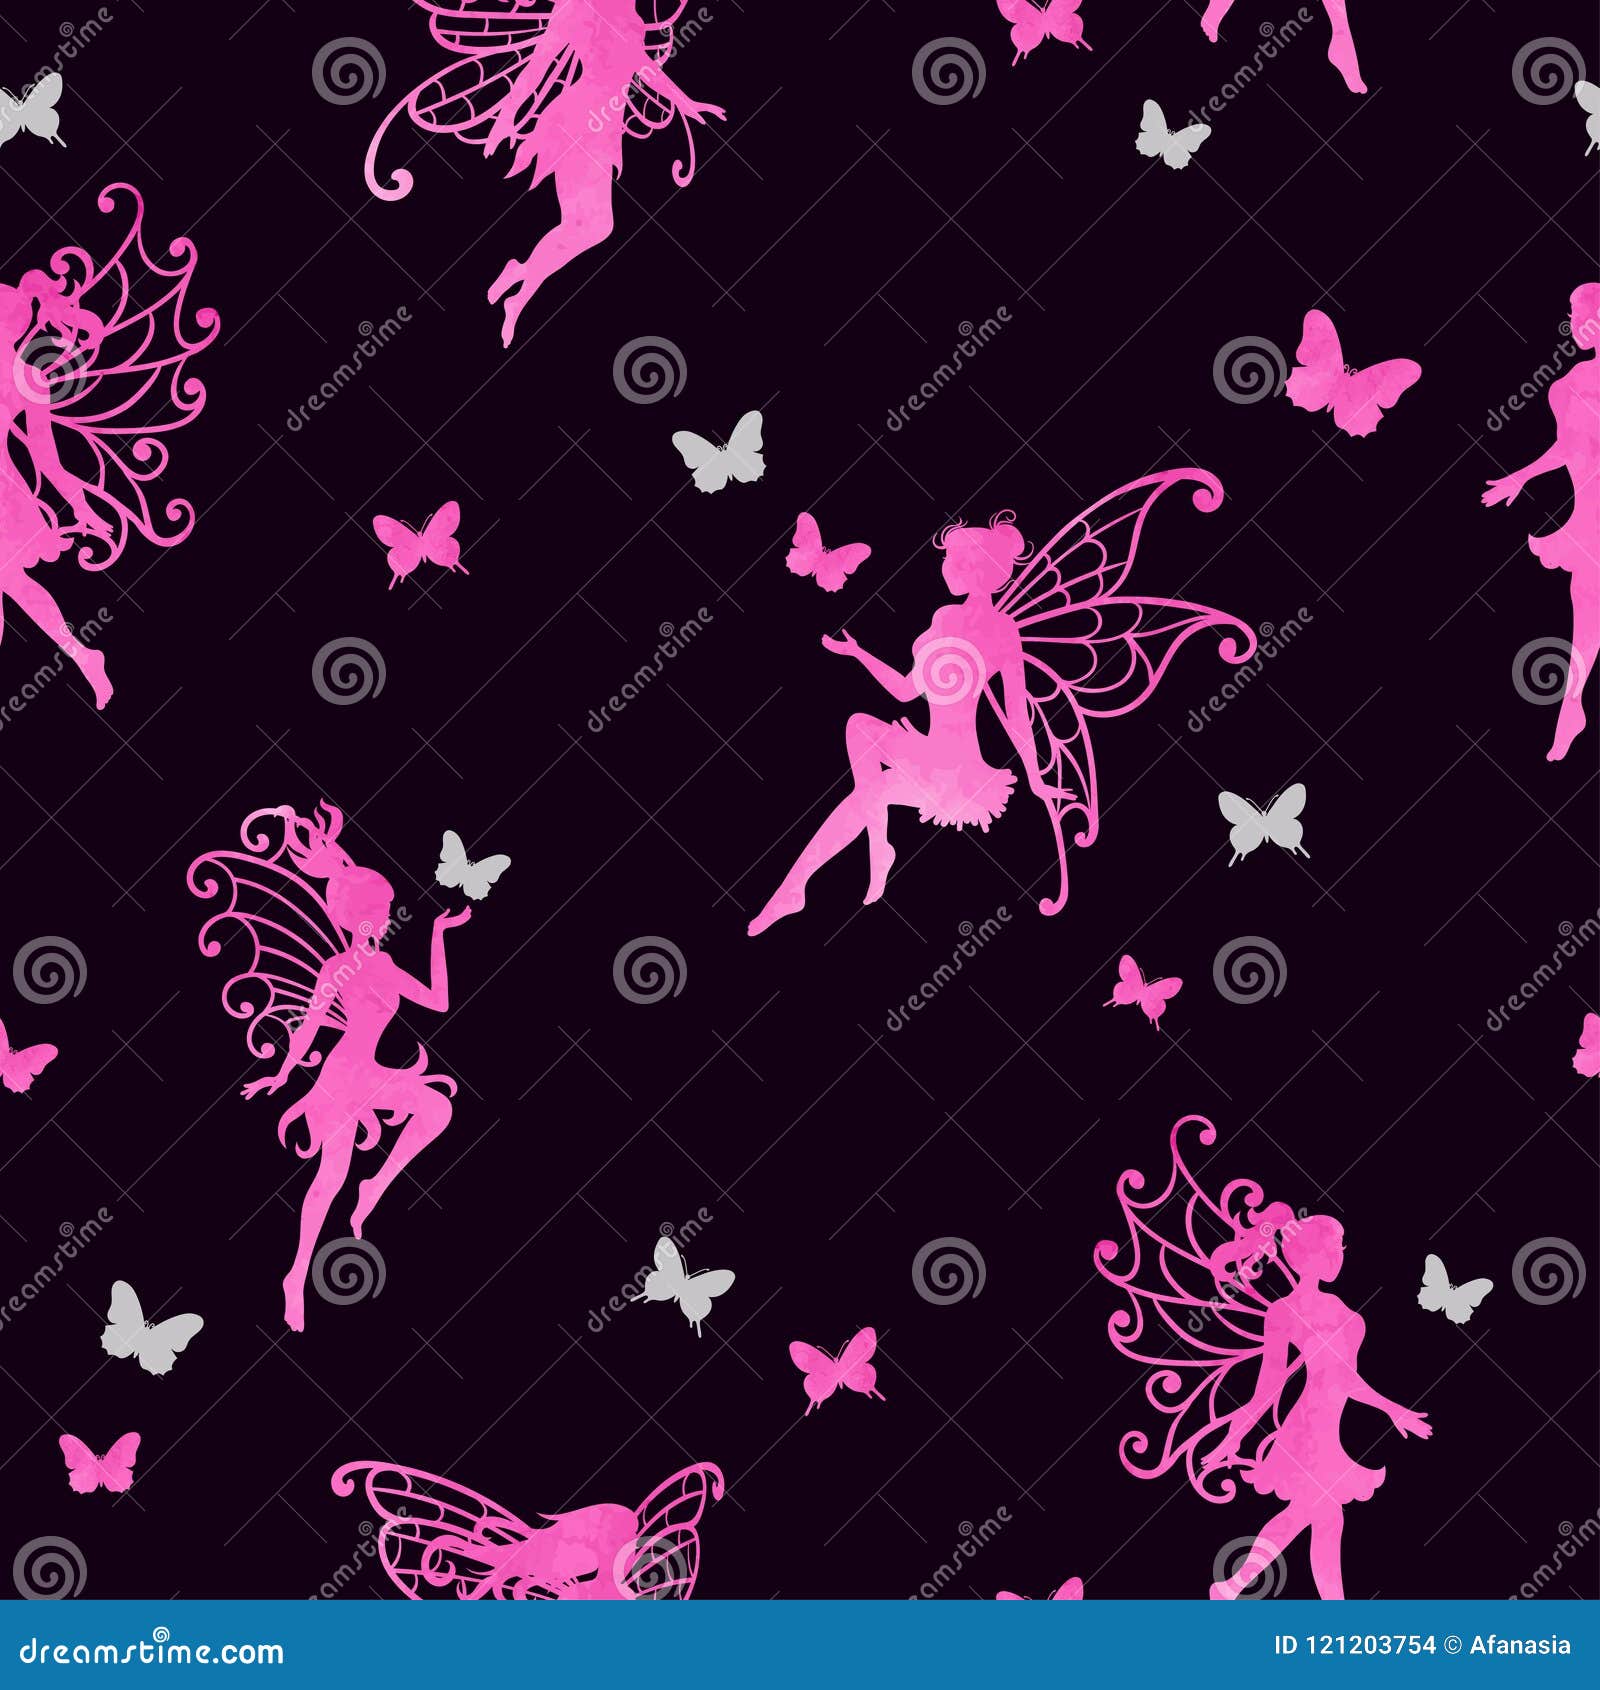 Seamless Magical Pattern With Watercolor Pink Fairies And